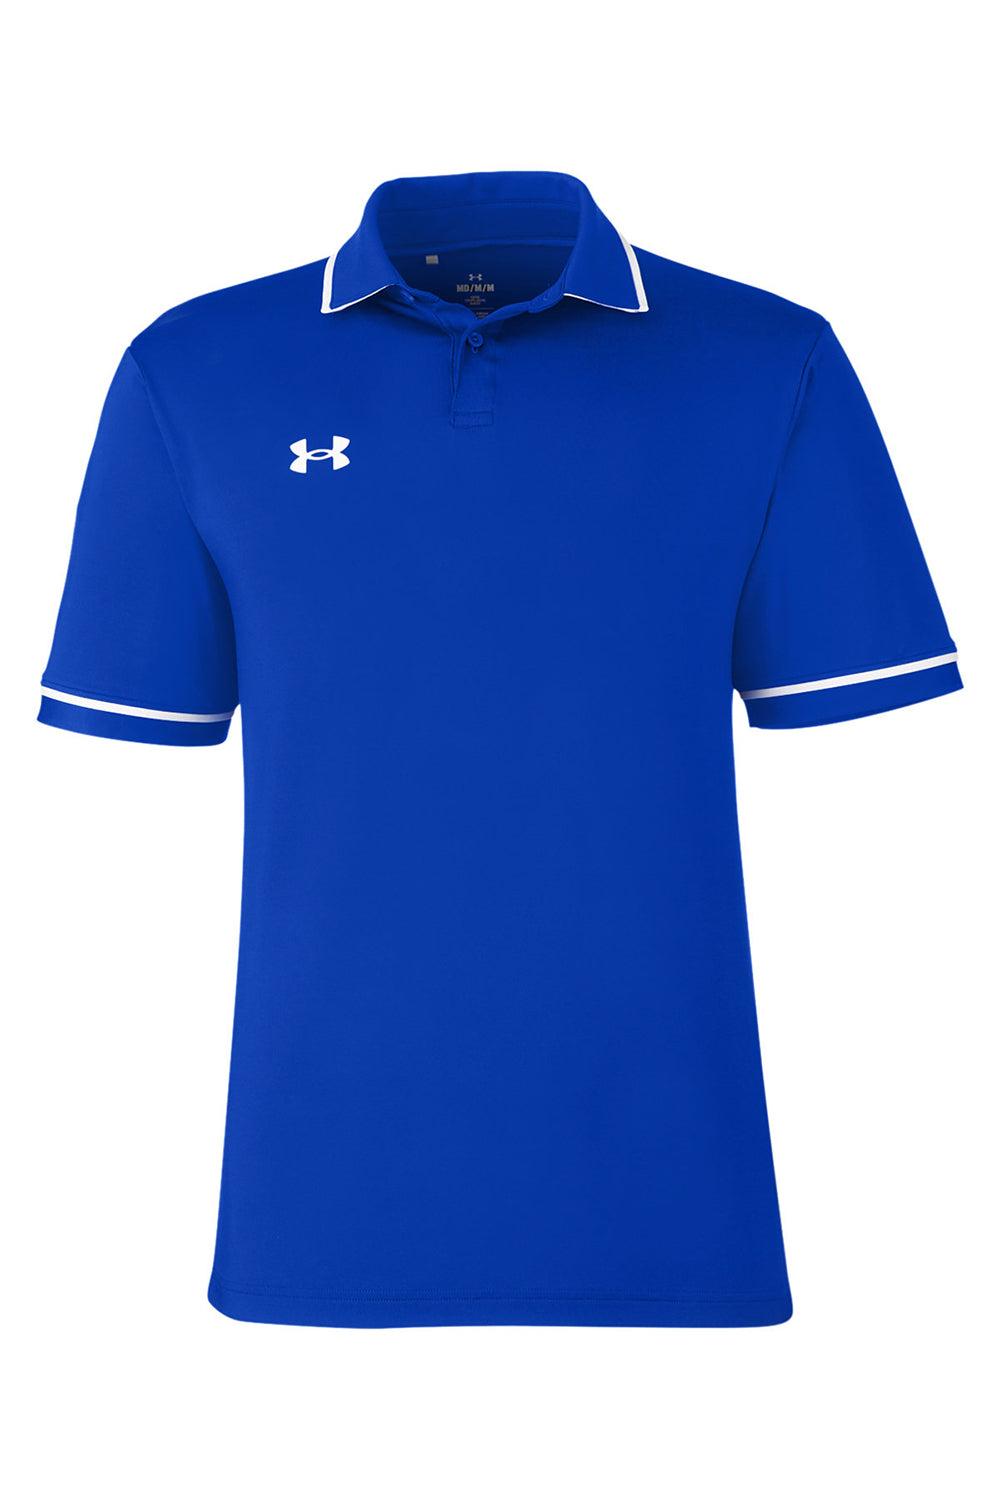 Under Armour 1376904 Mens Teams Performance Moisture Wicking Short Sleeve Polo Shirt Royal Blue Flat Front